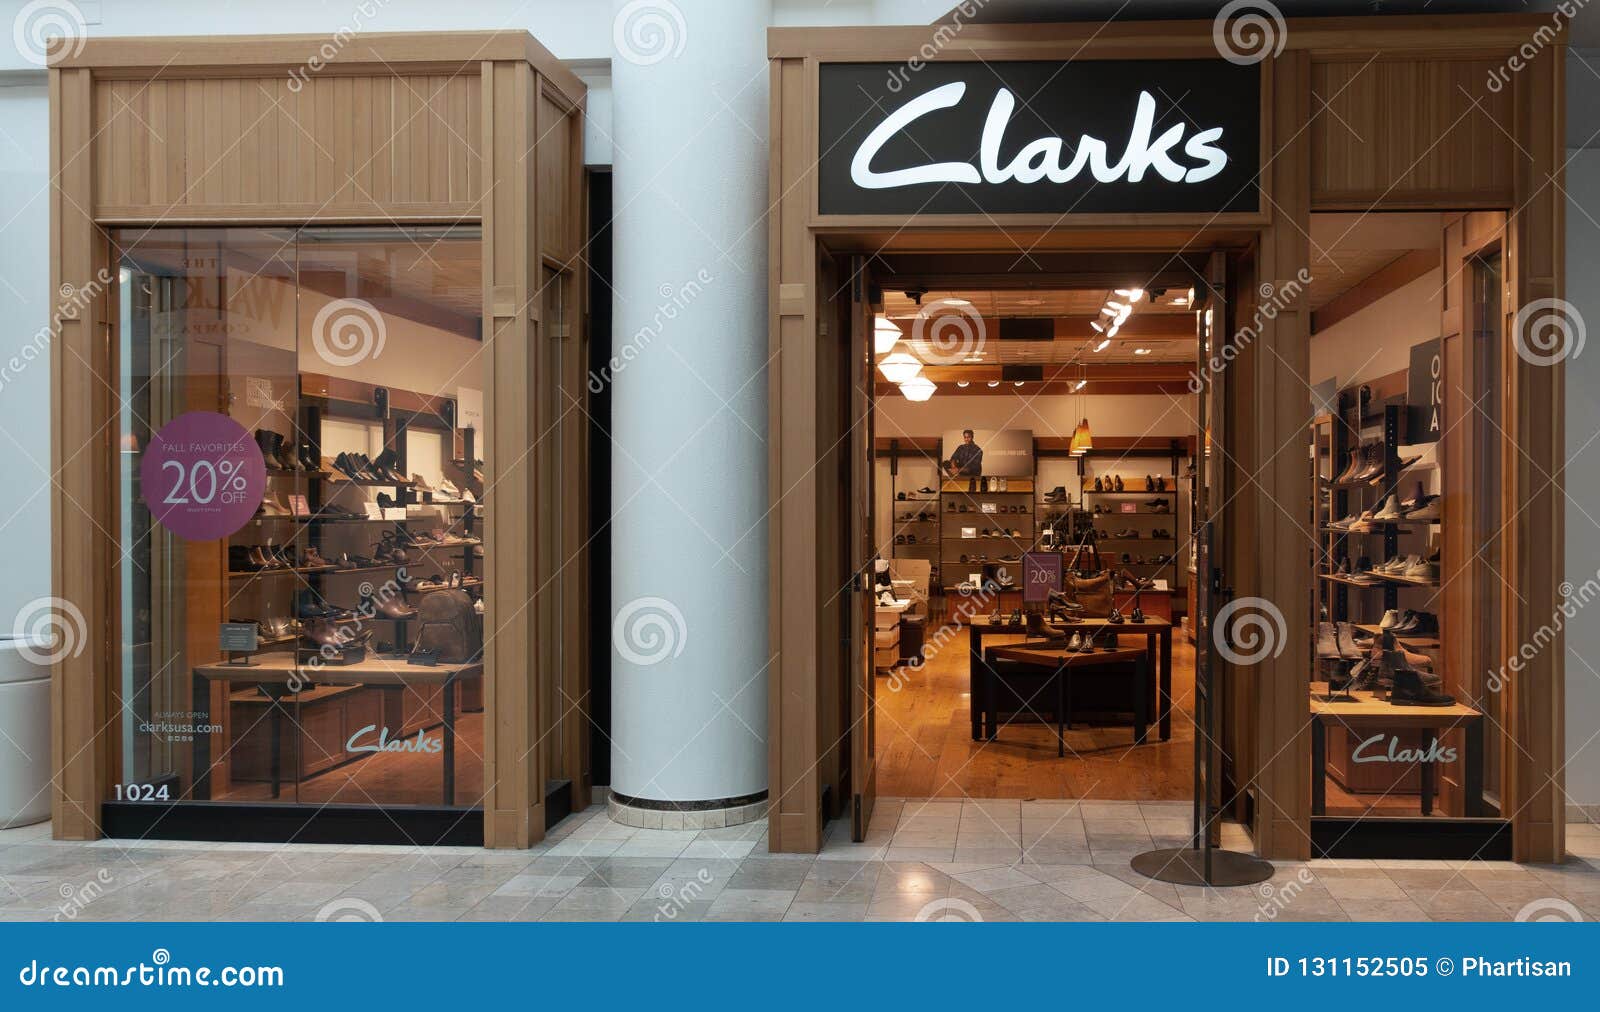 clarks outlet dolphin mall